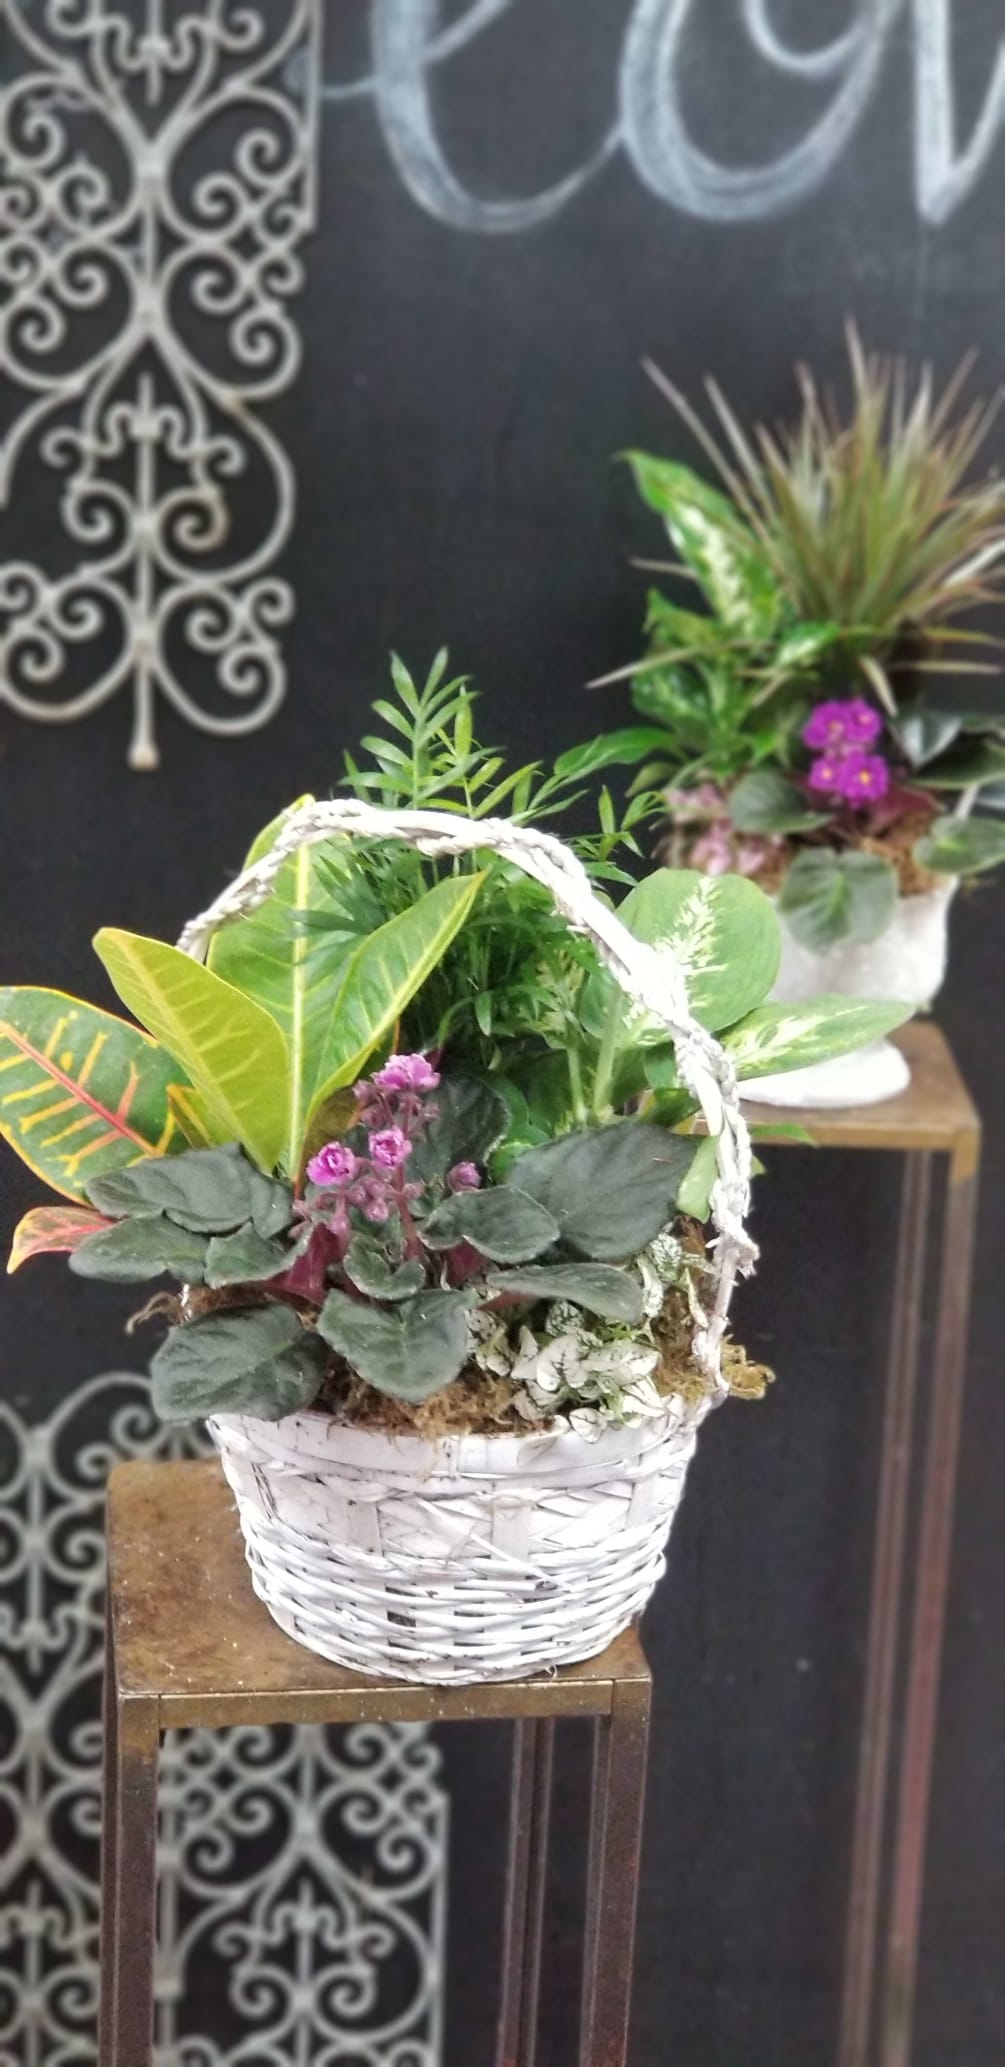 Mixture of a green plants and blooming plants in nice ceramic container